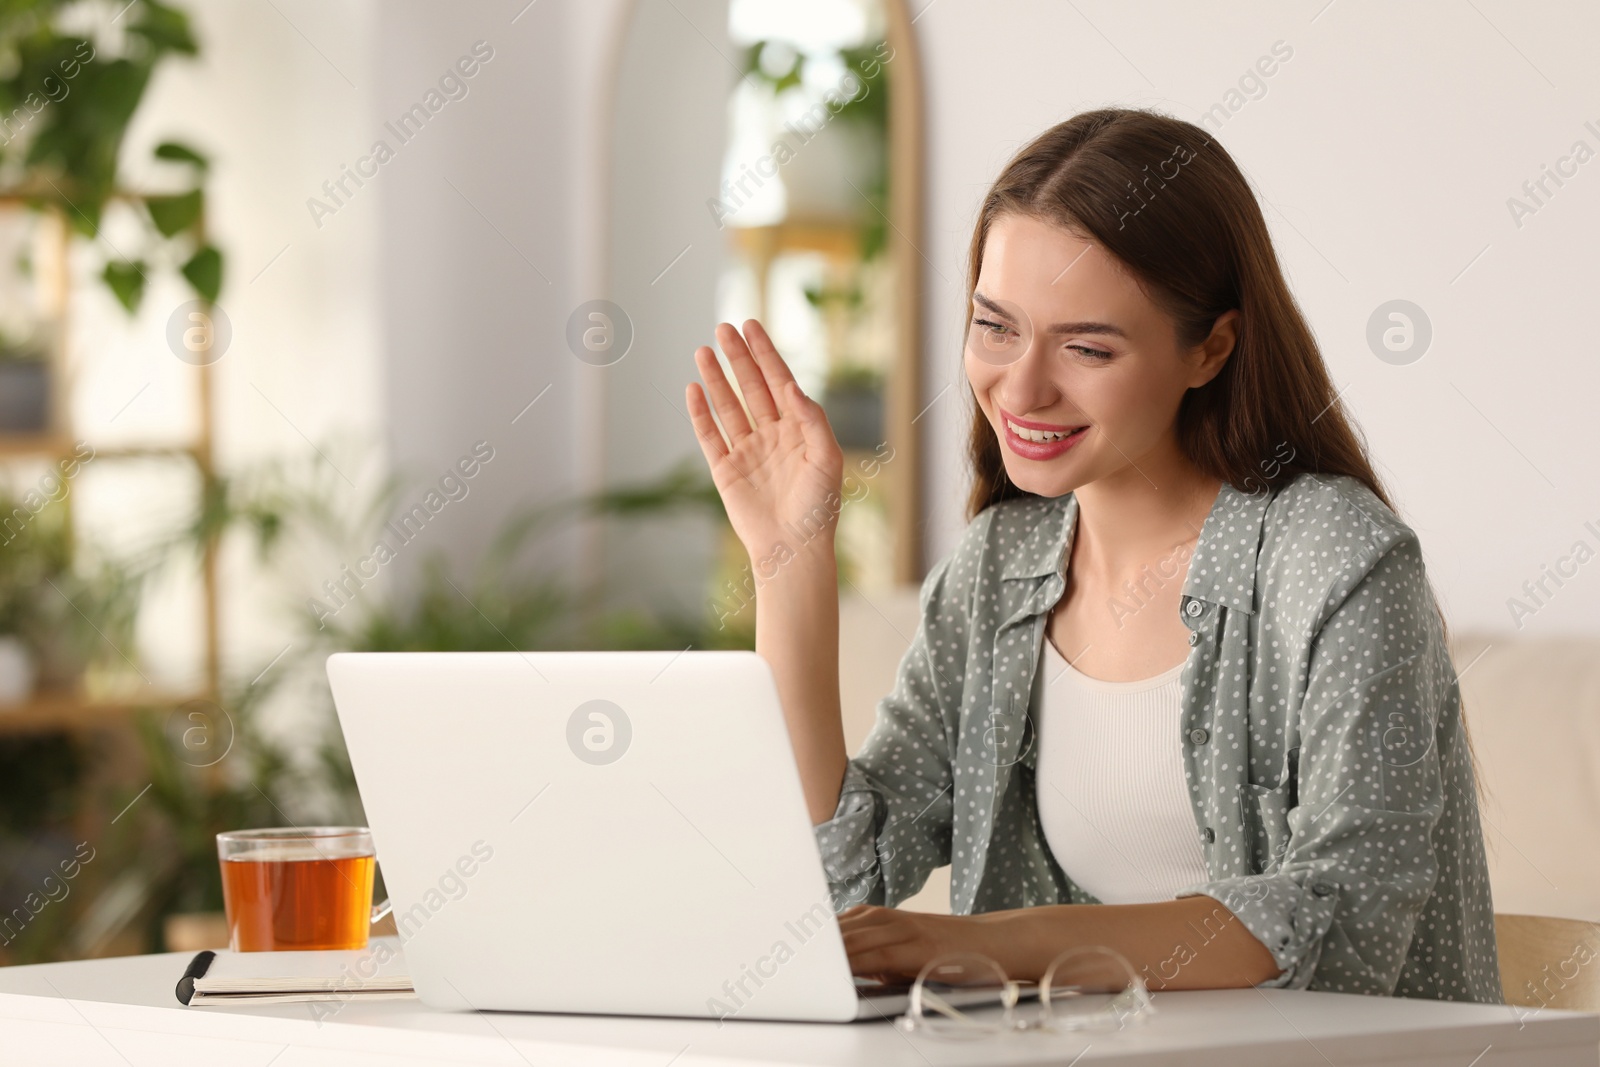 Photo of Happy young woman having video chat on laptop at table indoors